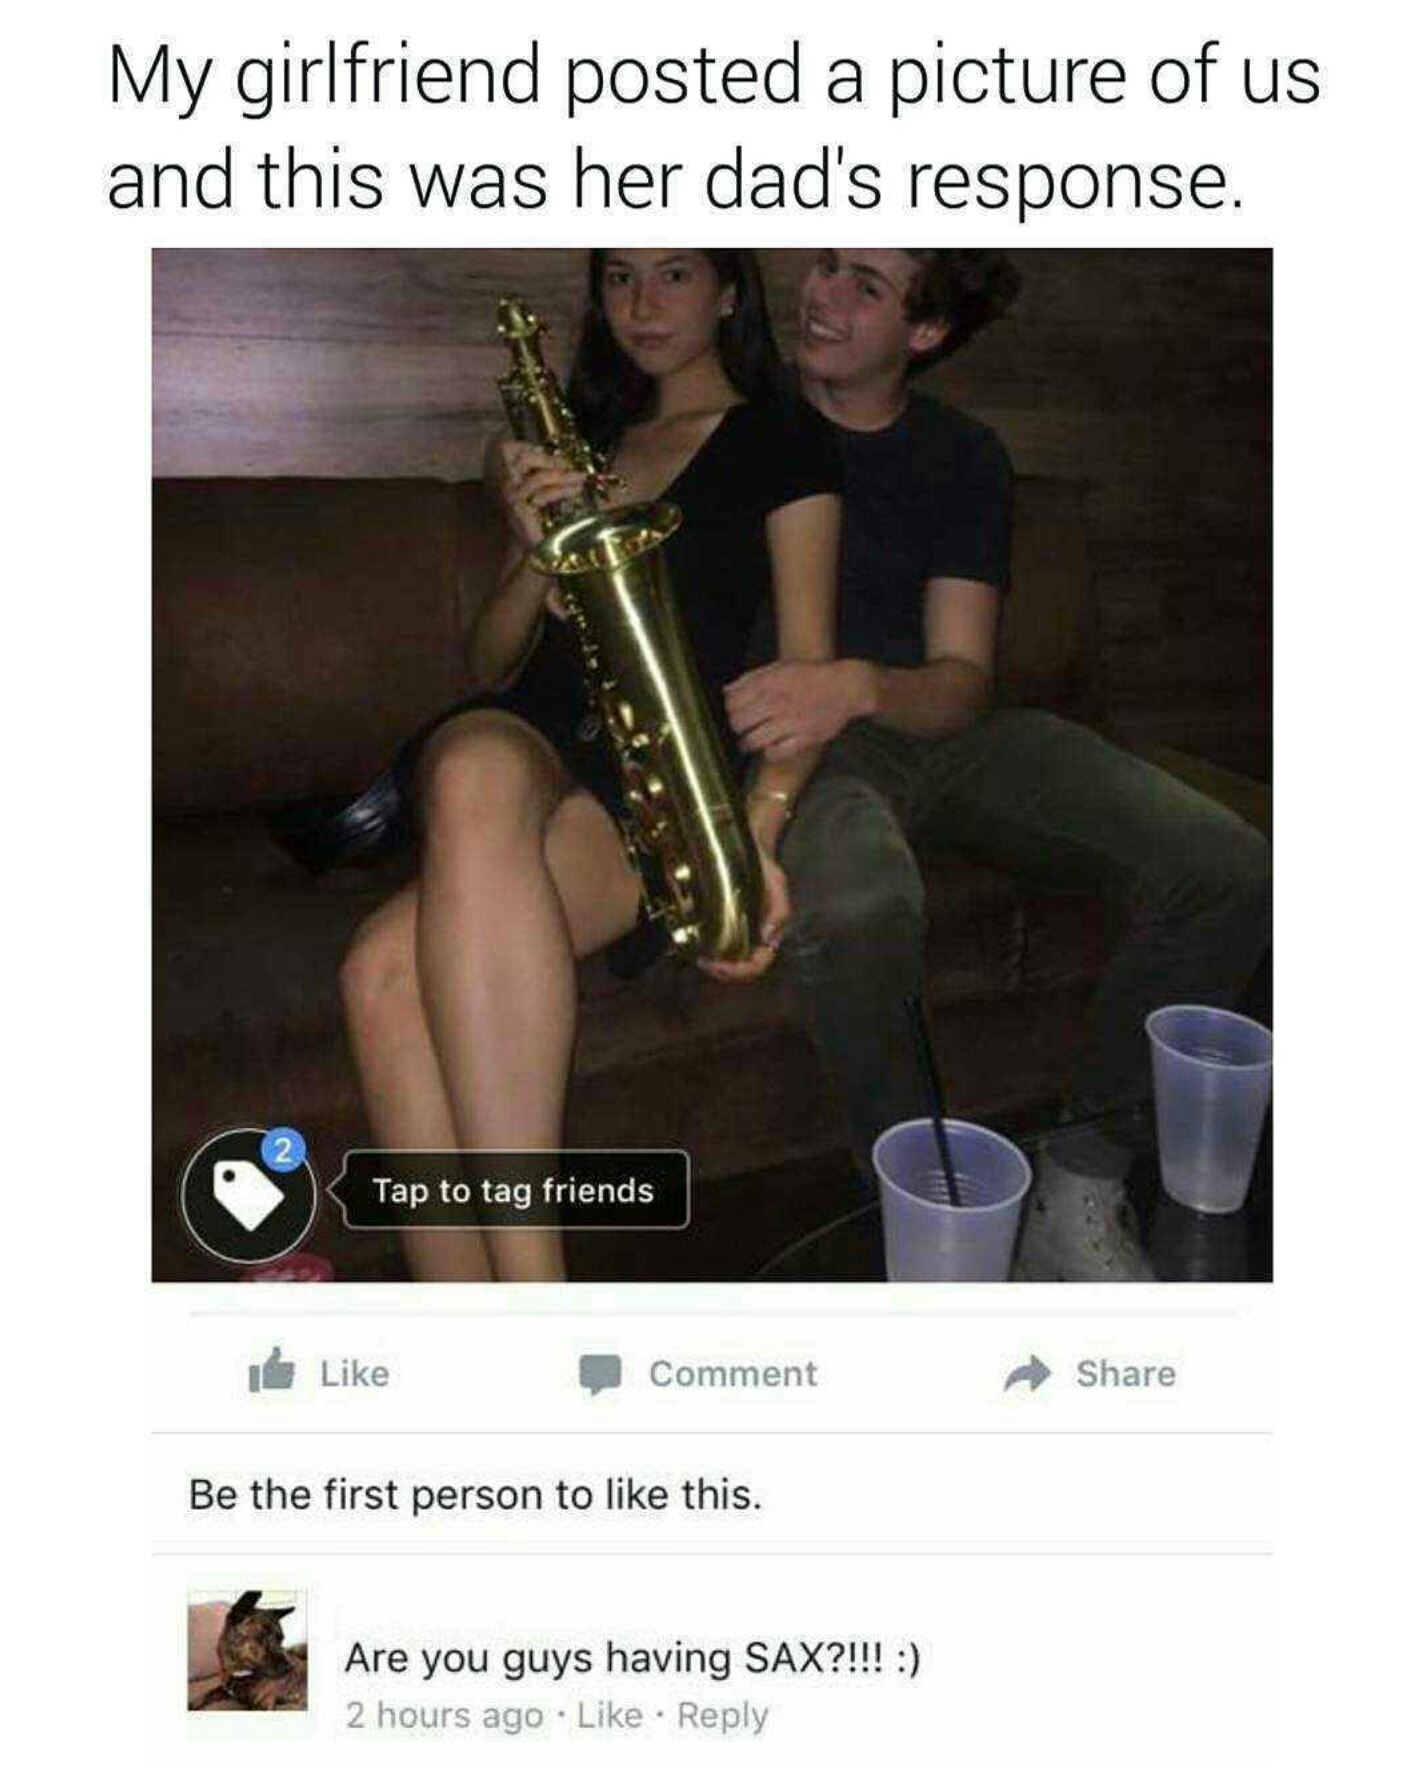 meme saxofone - My girlfriend posted a picture of us and this was her dad's response. Tap to tag friends de Comment Be the first person to this. Are you guys having Sax?!!! 2 hours ago